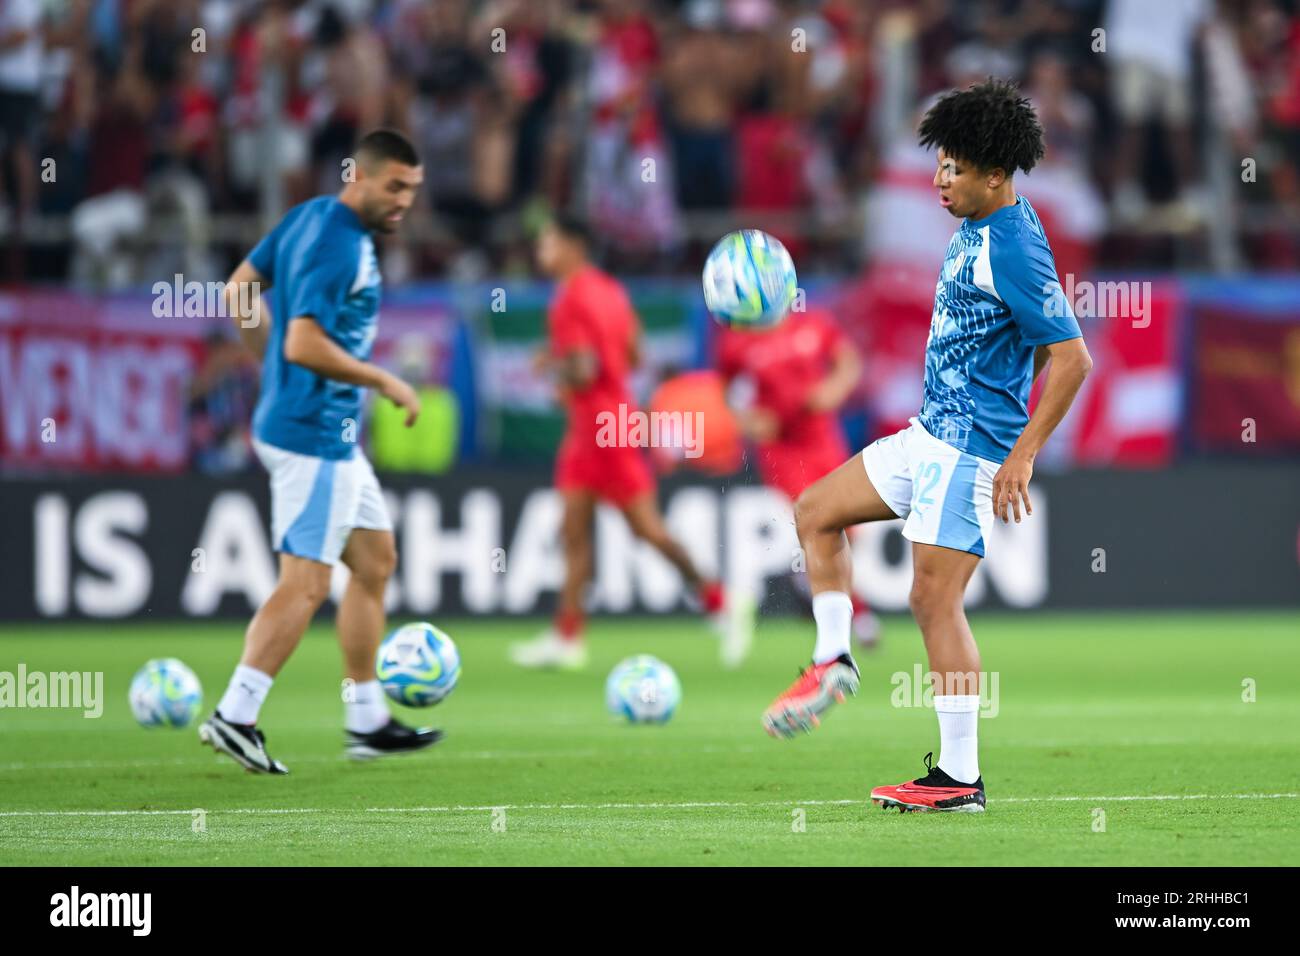 Piraeus, Greece. 16 August, 2023: Rico Lewis of Manchester City warms up during the UEFA Super Cup 2023 match between Manchester City FC and Sevilla FC at Georgios Karaiskakis Stadium in Piraeus, Greece. August 16, 2023. (Photo by Nikola Krstic/Alamy) Stock Photo